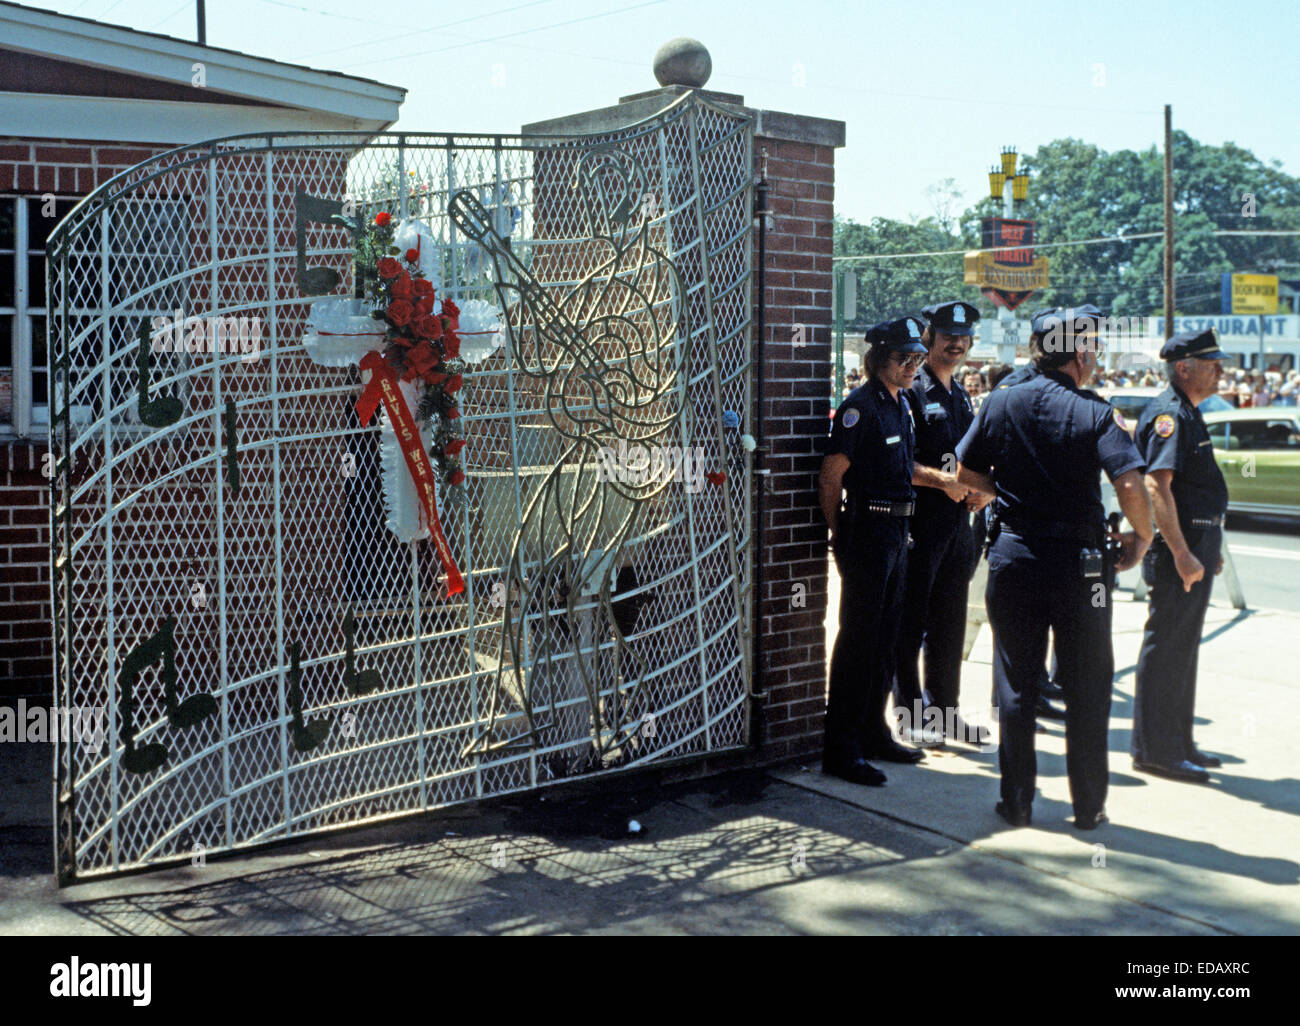 ELVIS PRESLEY FUNERAL, MEMPHIS, TENNESSEE, USA - 18TH AUGUST 1977. Memphis police outside Graceland on day of Elvis Presley funeral. Stock Photo